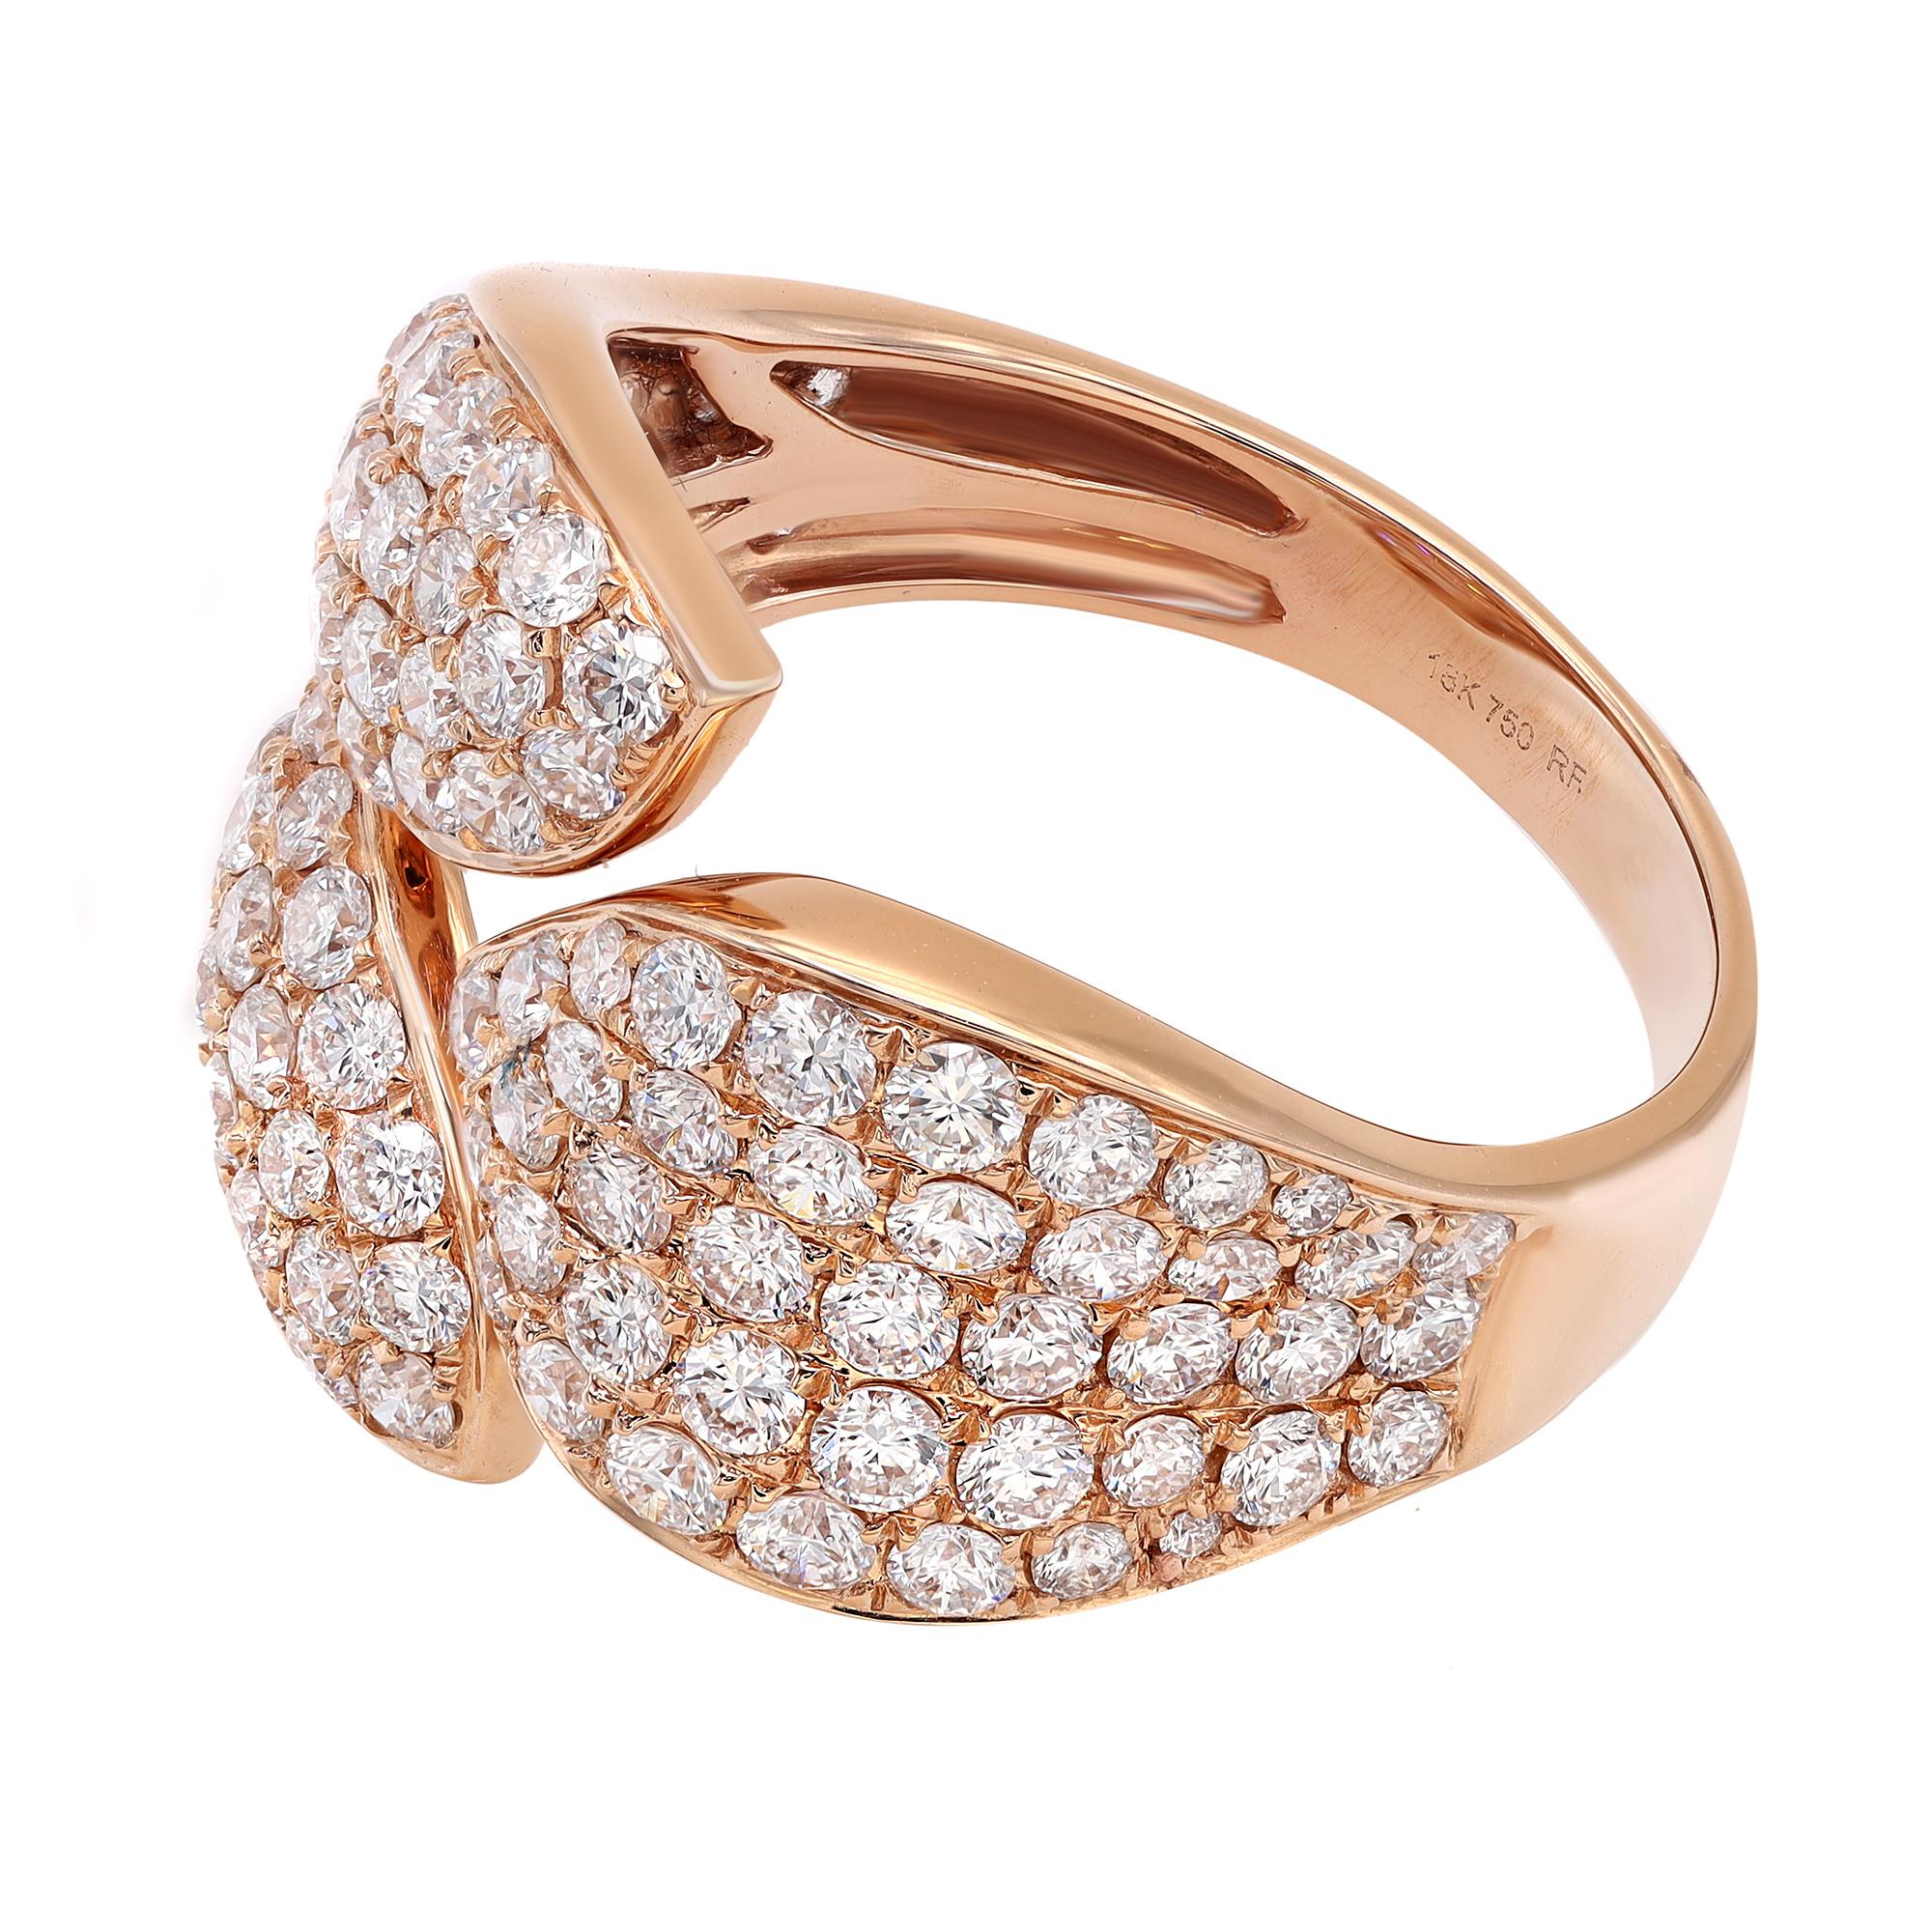 Rachel Koen Pave Set Round Cut Diamond Ring 18K Rose Gold 2.00Cttw In New Condition For Sale In New York, NY